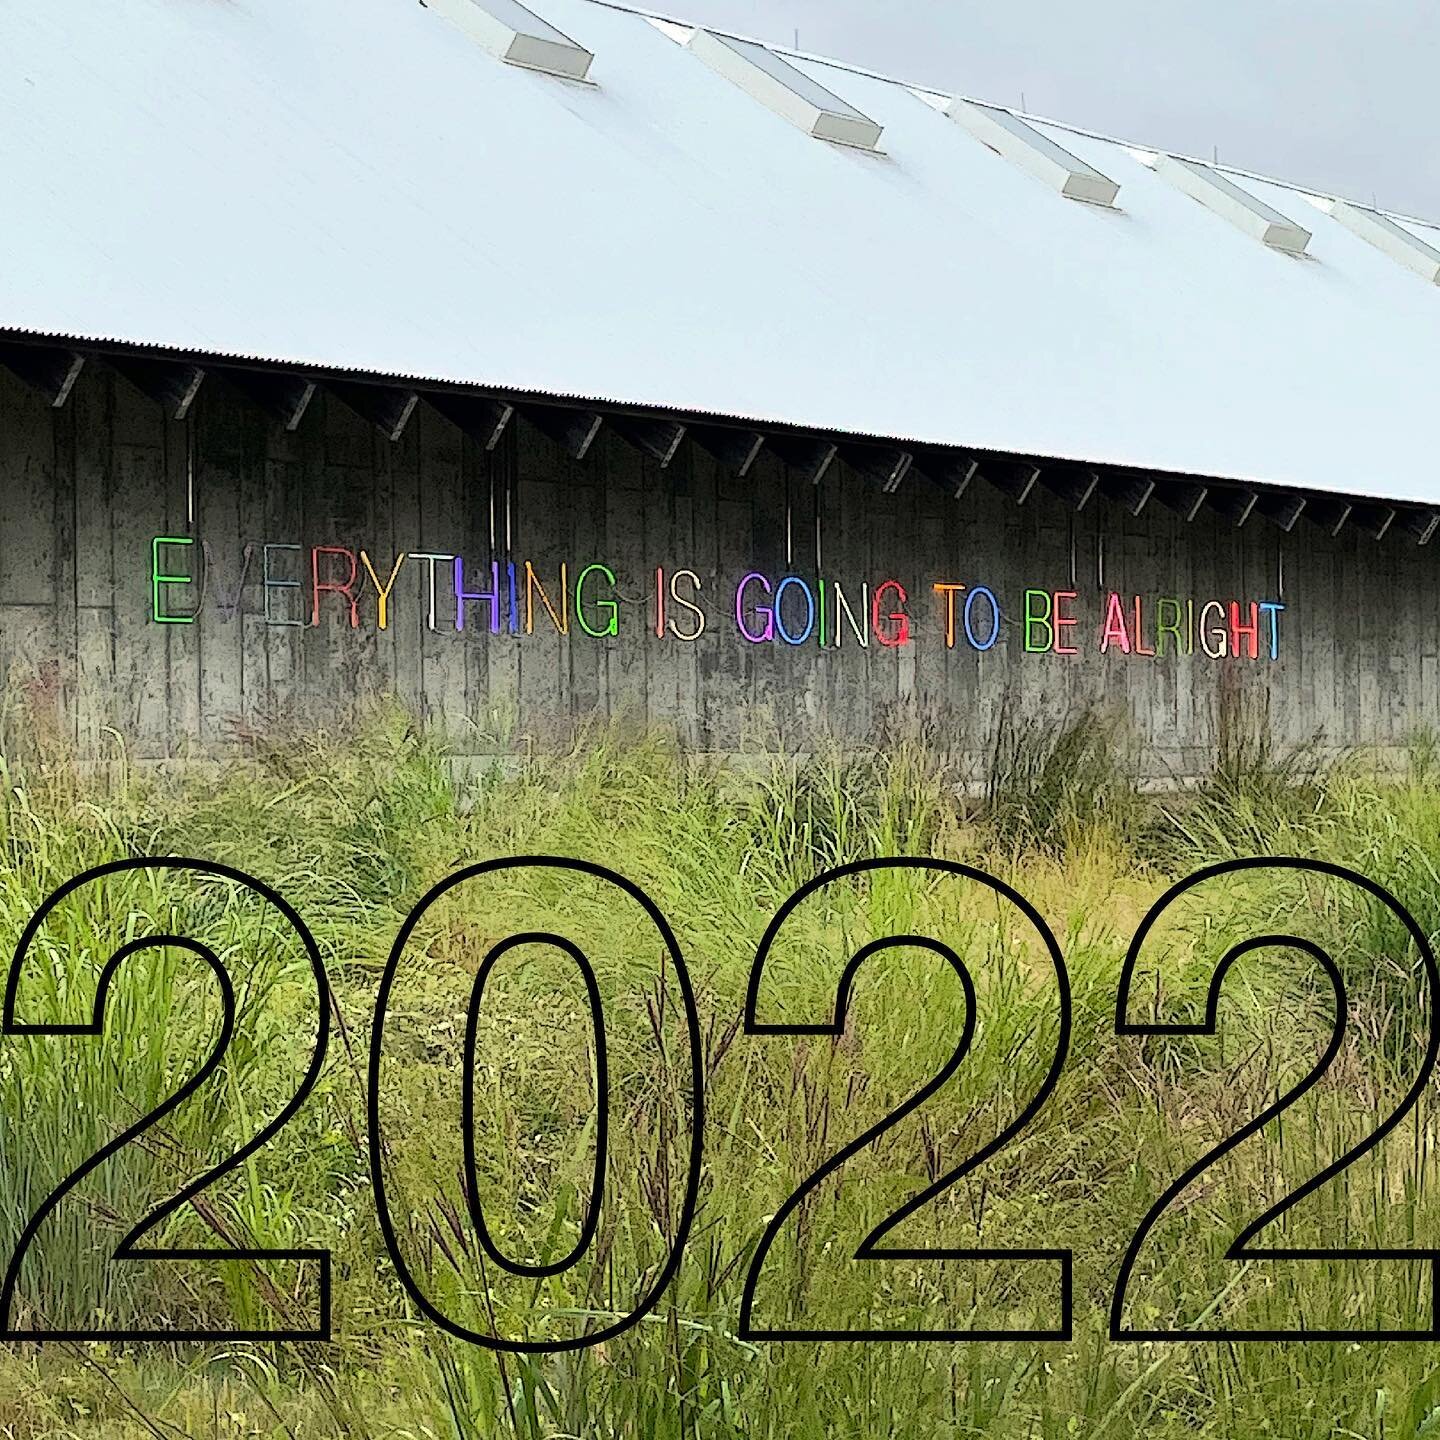 Looking forward to 2022 🍾

Work No. 2210 &ldquo;Everything Is Going To Be Alright&rdquo; by artist Martin Creed @parrishartmuseum  August 2021